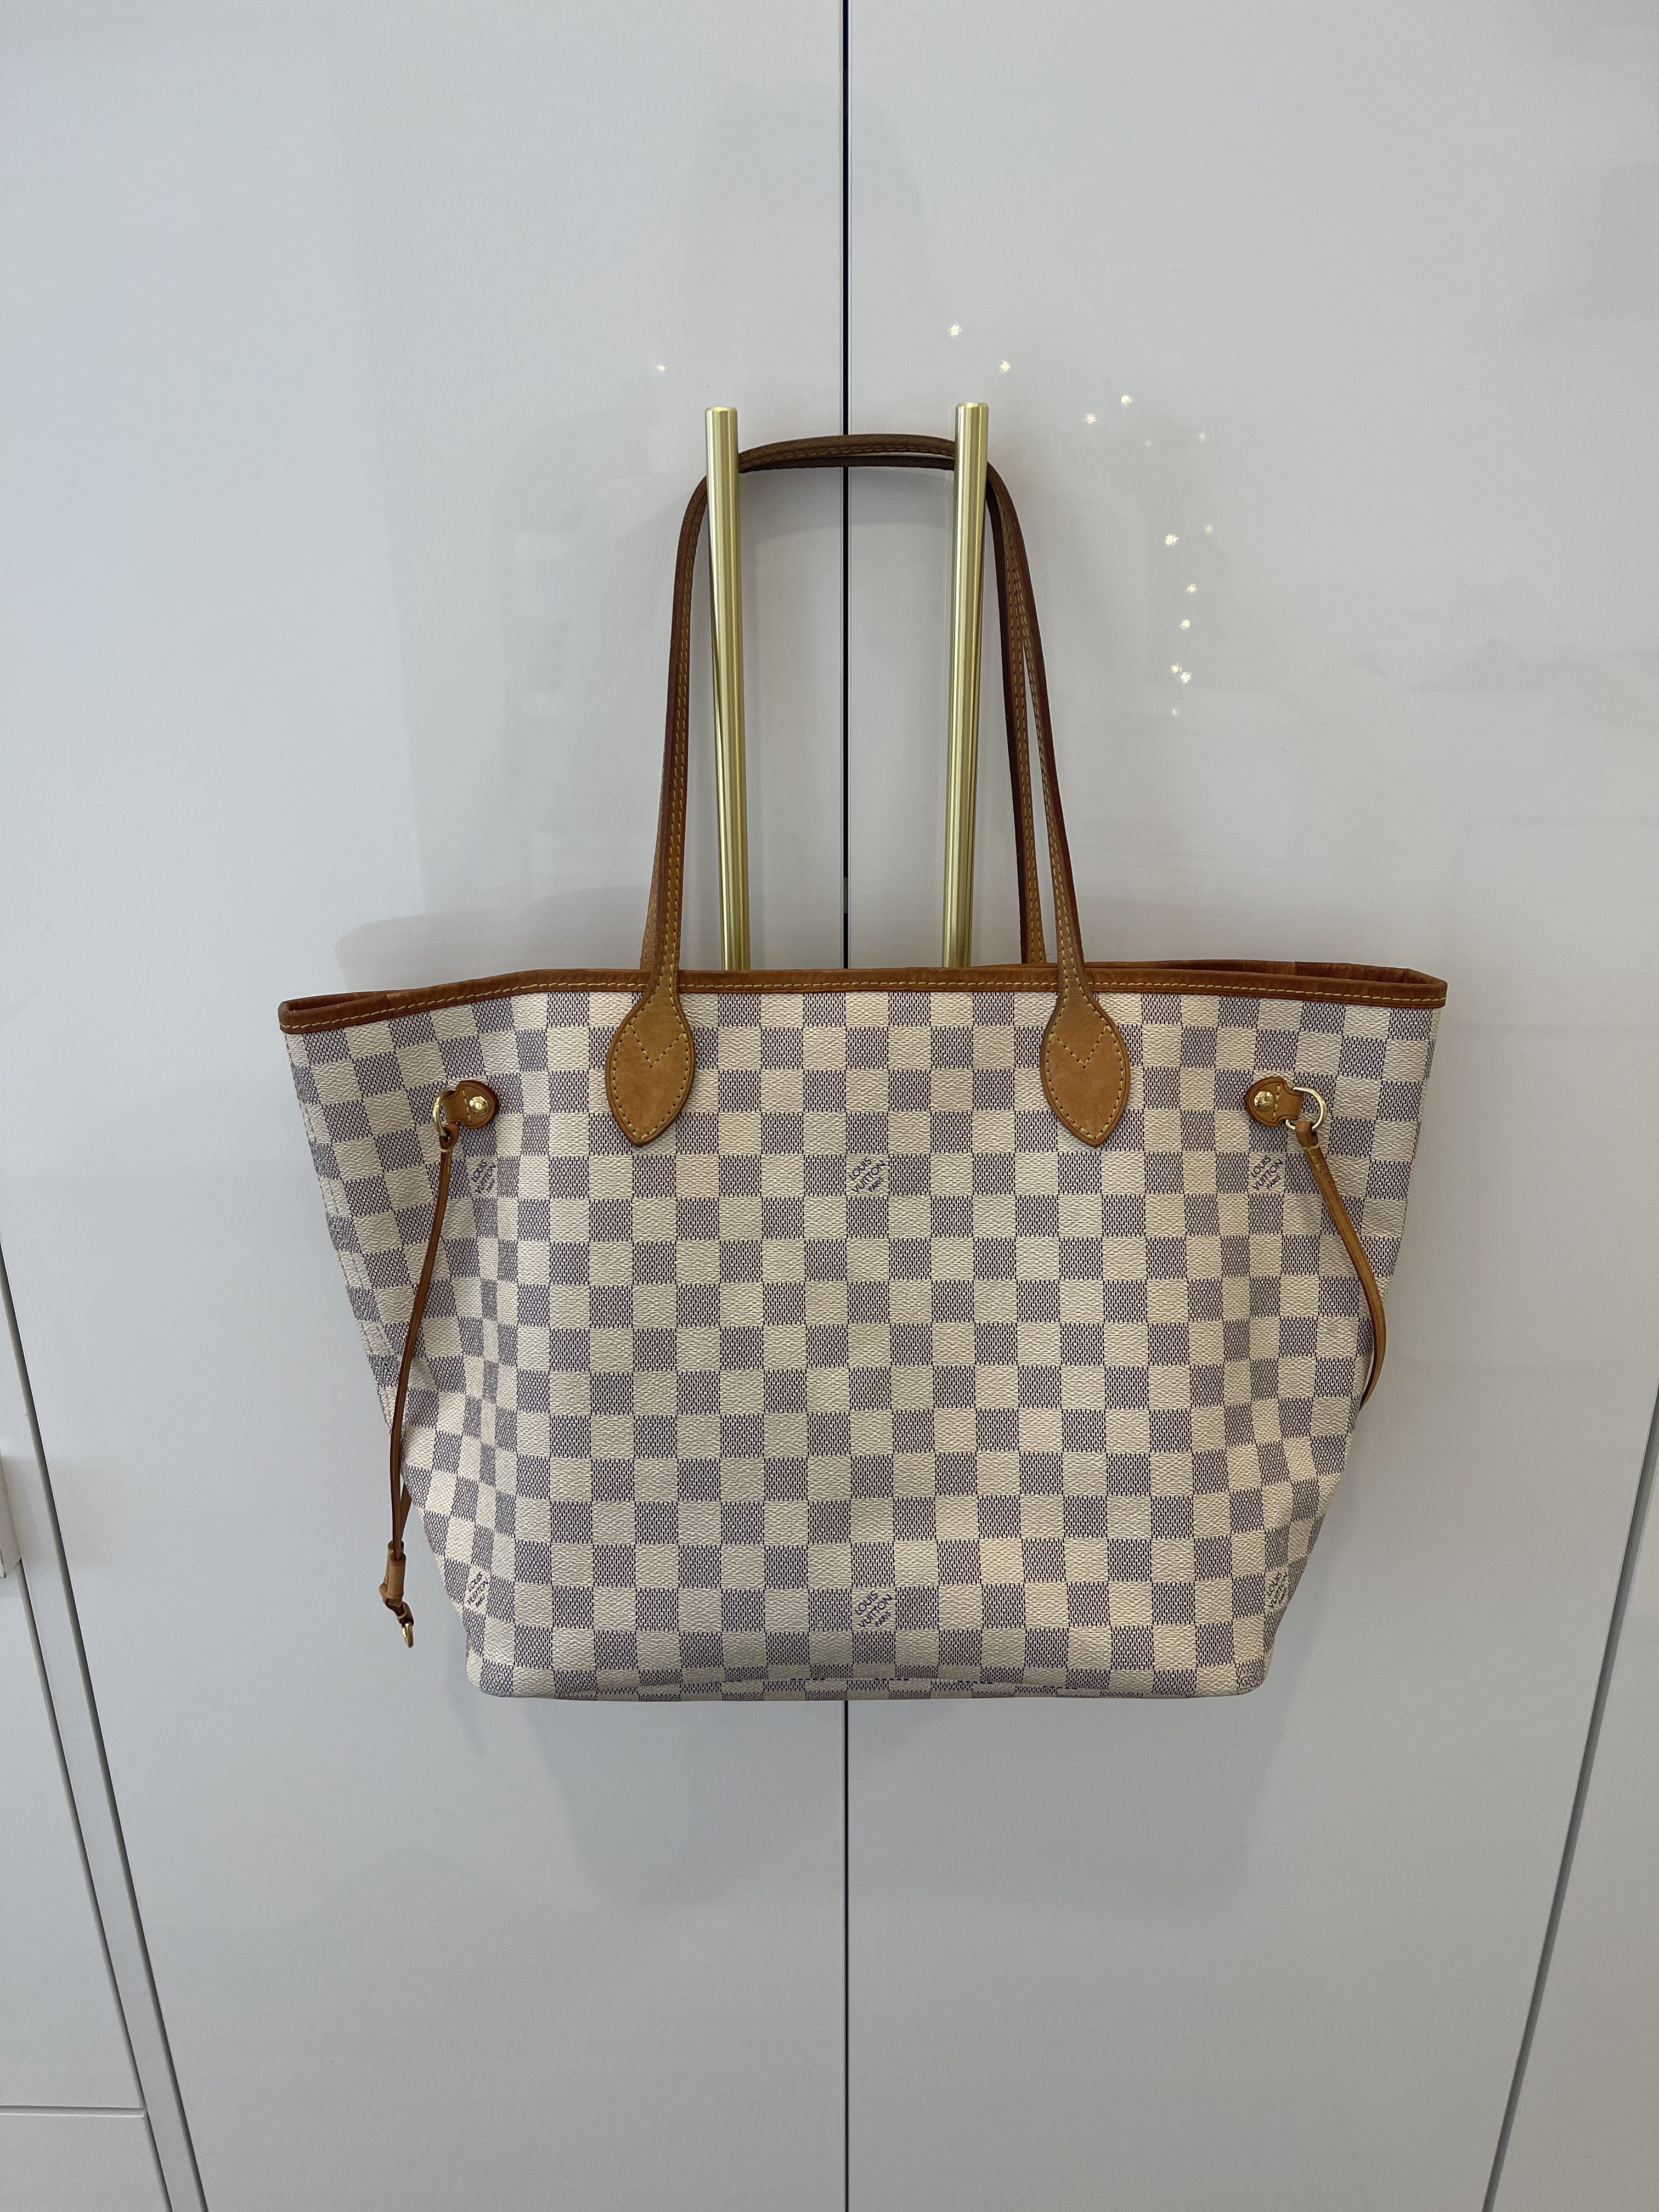 LV Damier Azur Noe- in a darker patina (picts from TPF)  Louis vuitton  handbags neverfull, Louis vuitton handbags outlet, Louis vuitton bag